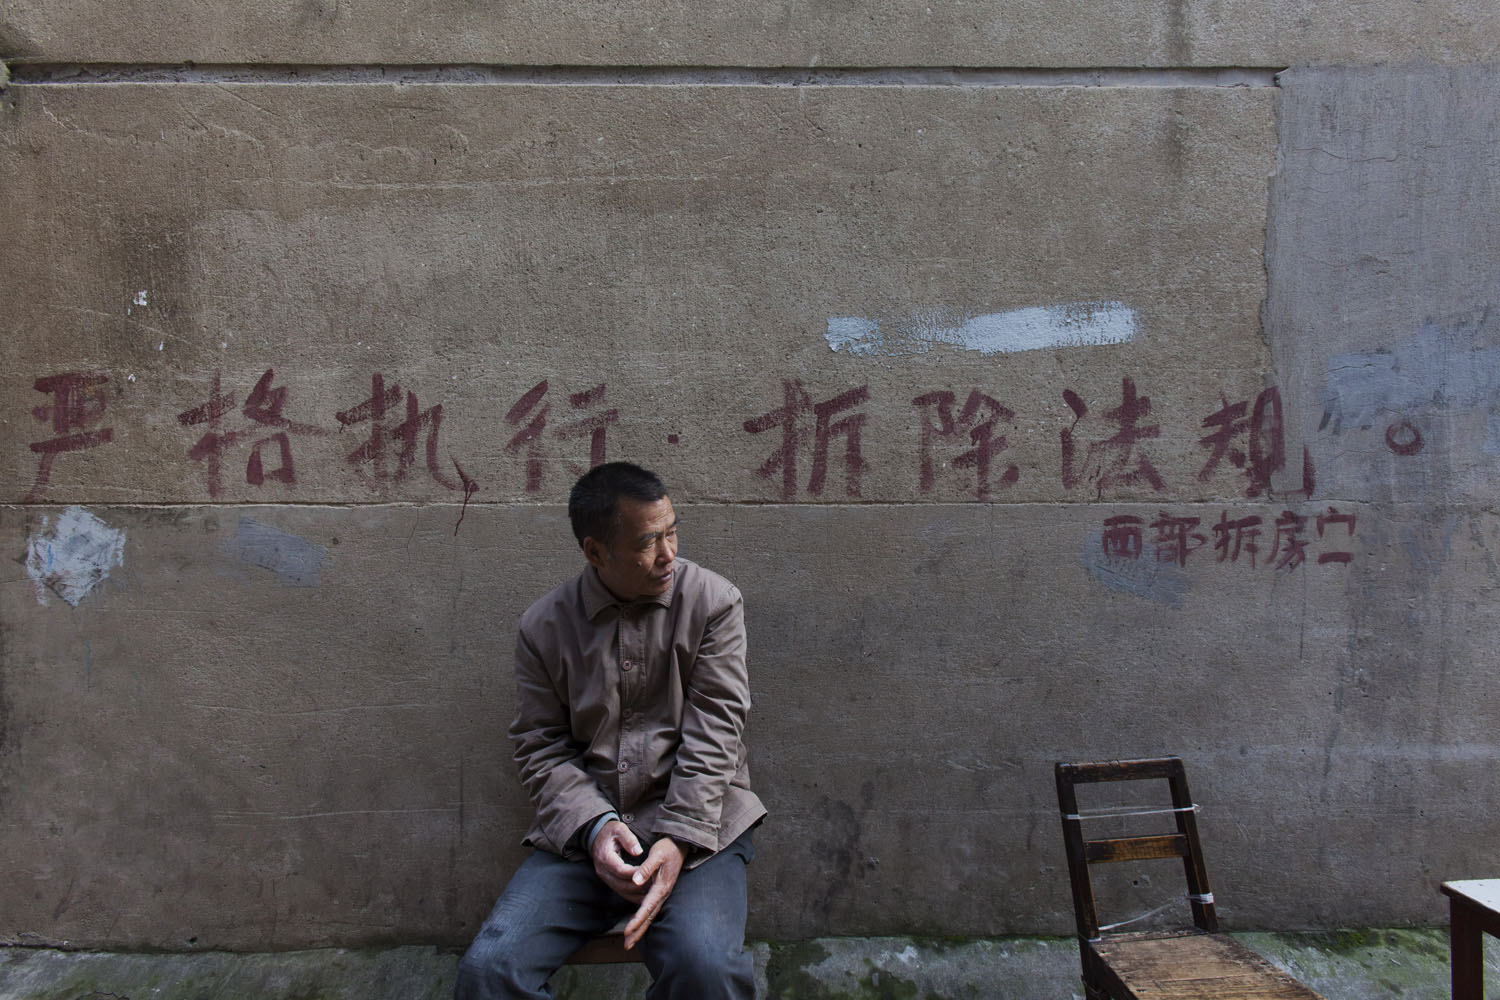 A man sits in front of a painted neighborhood notice that reads, "Abide by Housing Removal/Relocation Policy". Guangfu Road. Shanghai, China. 2015.